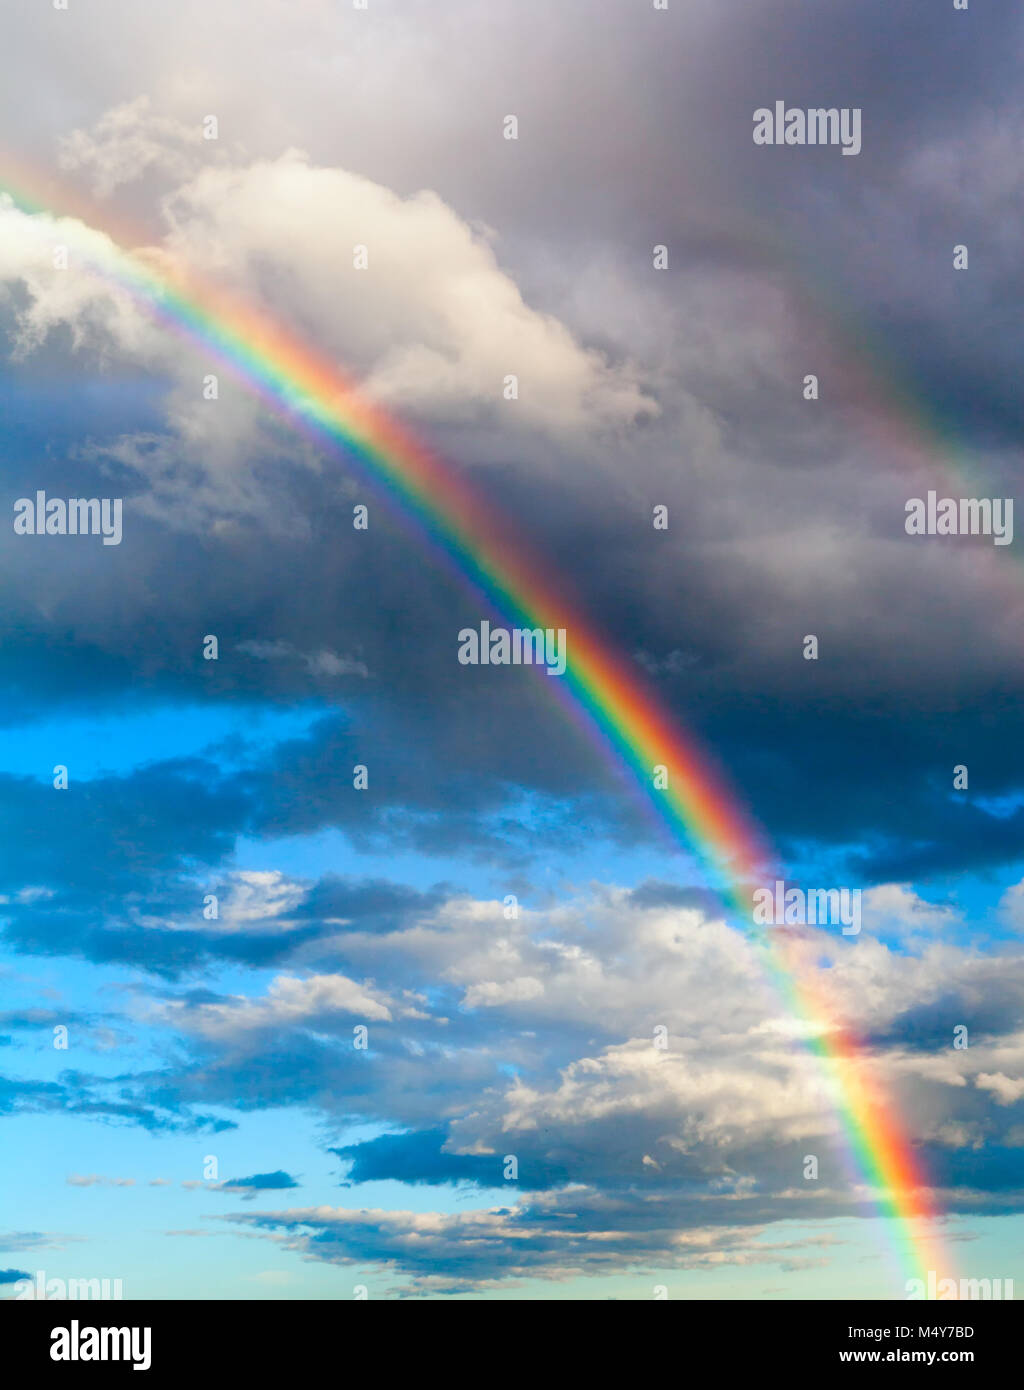 real rainbow in the cloudy sky Stock Photo